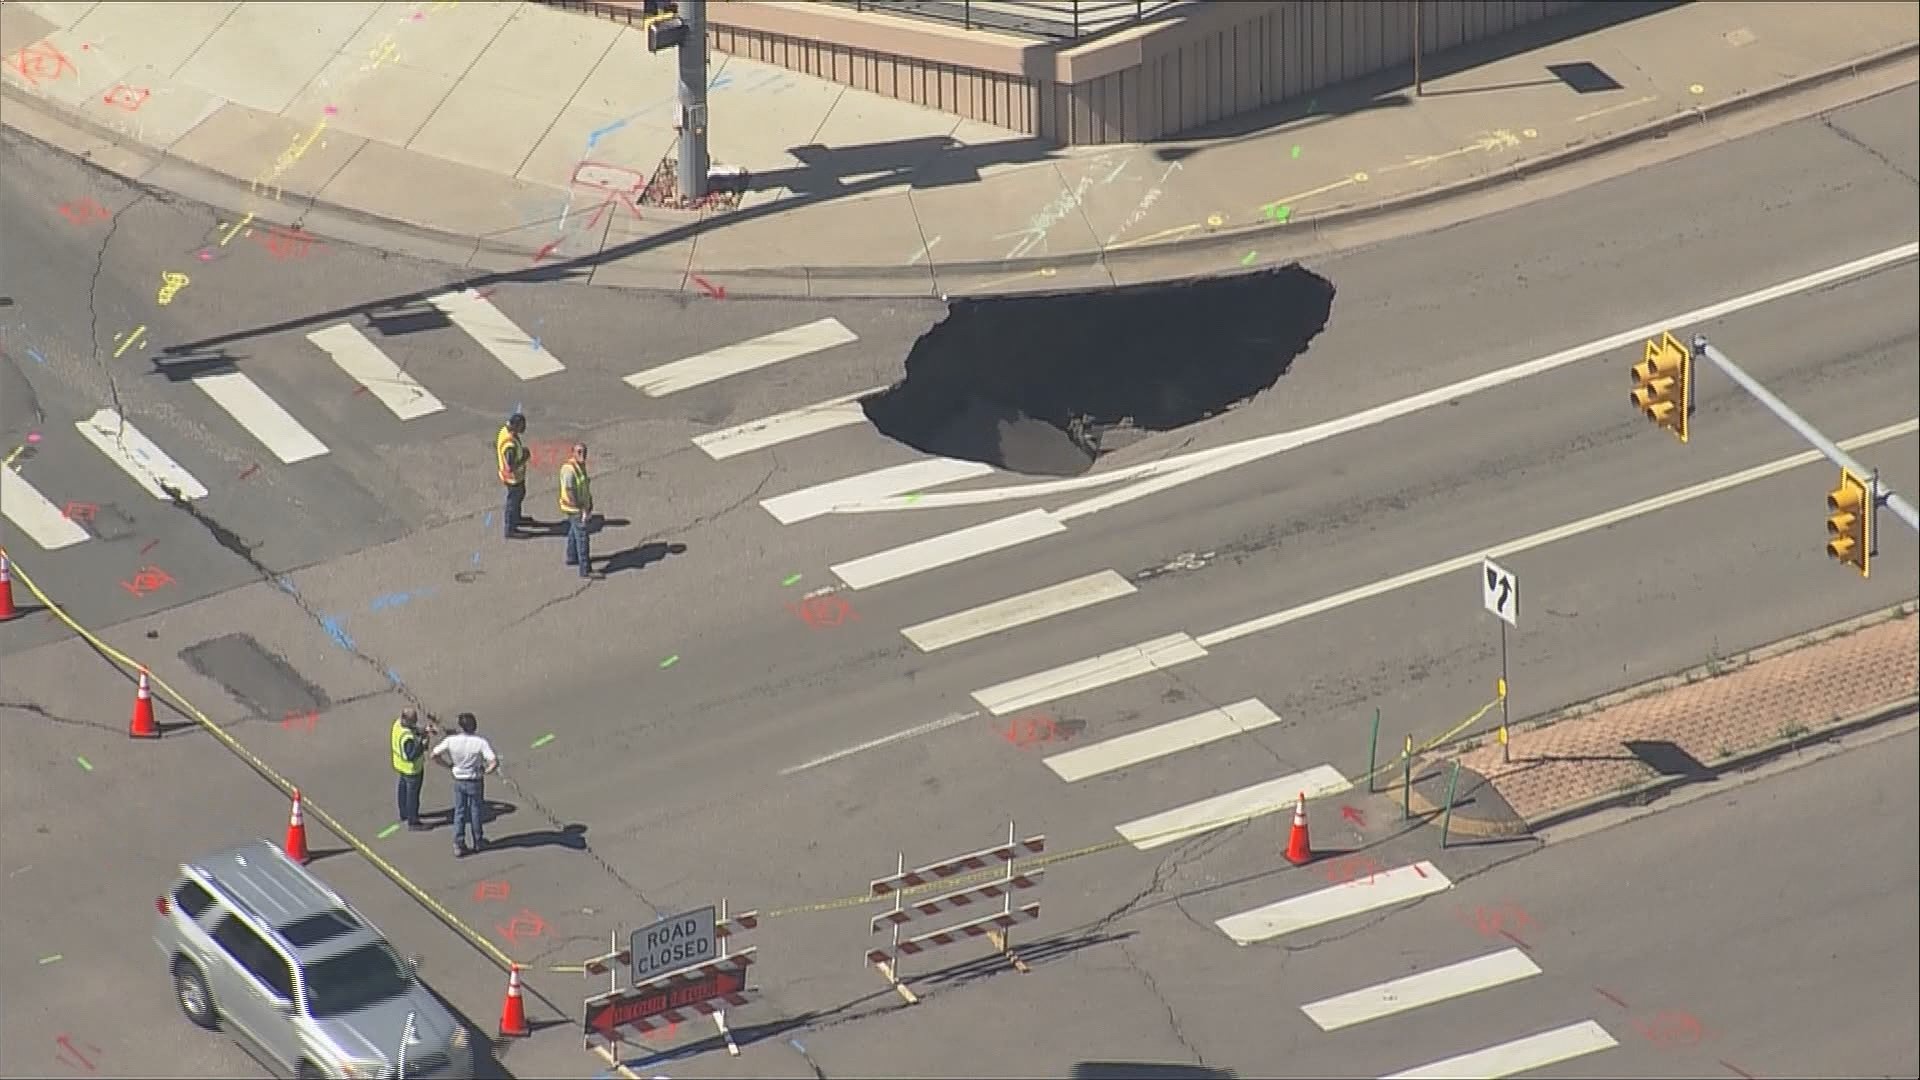 The Englewood Police Department said there is a new sinkhole on Oxford Avenue near Santa Fe Drive, the fifth one in that area in eight years.